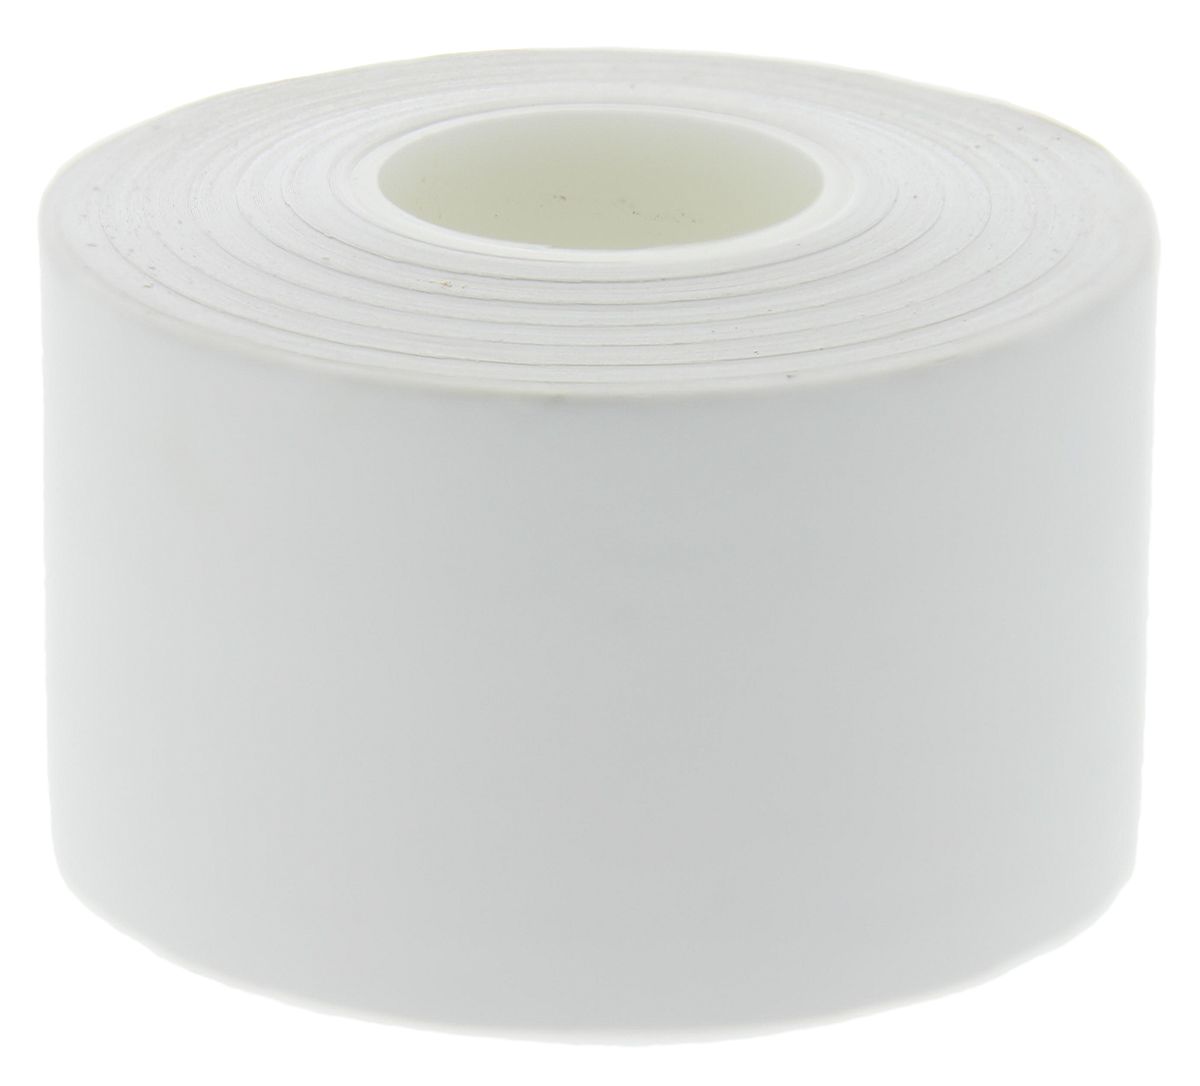 Advance Tapes AT7 White PVC Electrical Tape, 38mm x 20m